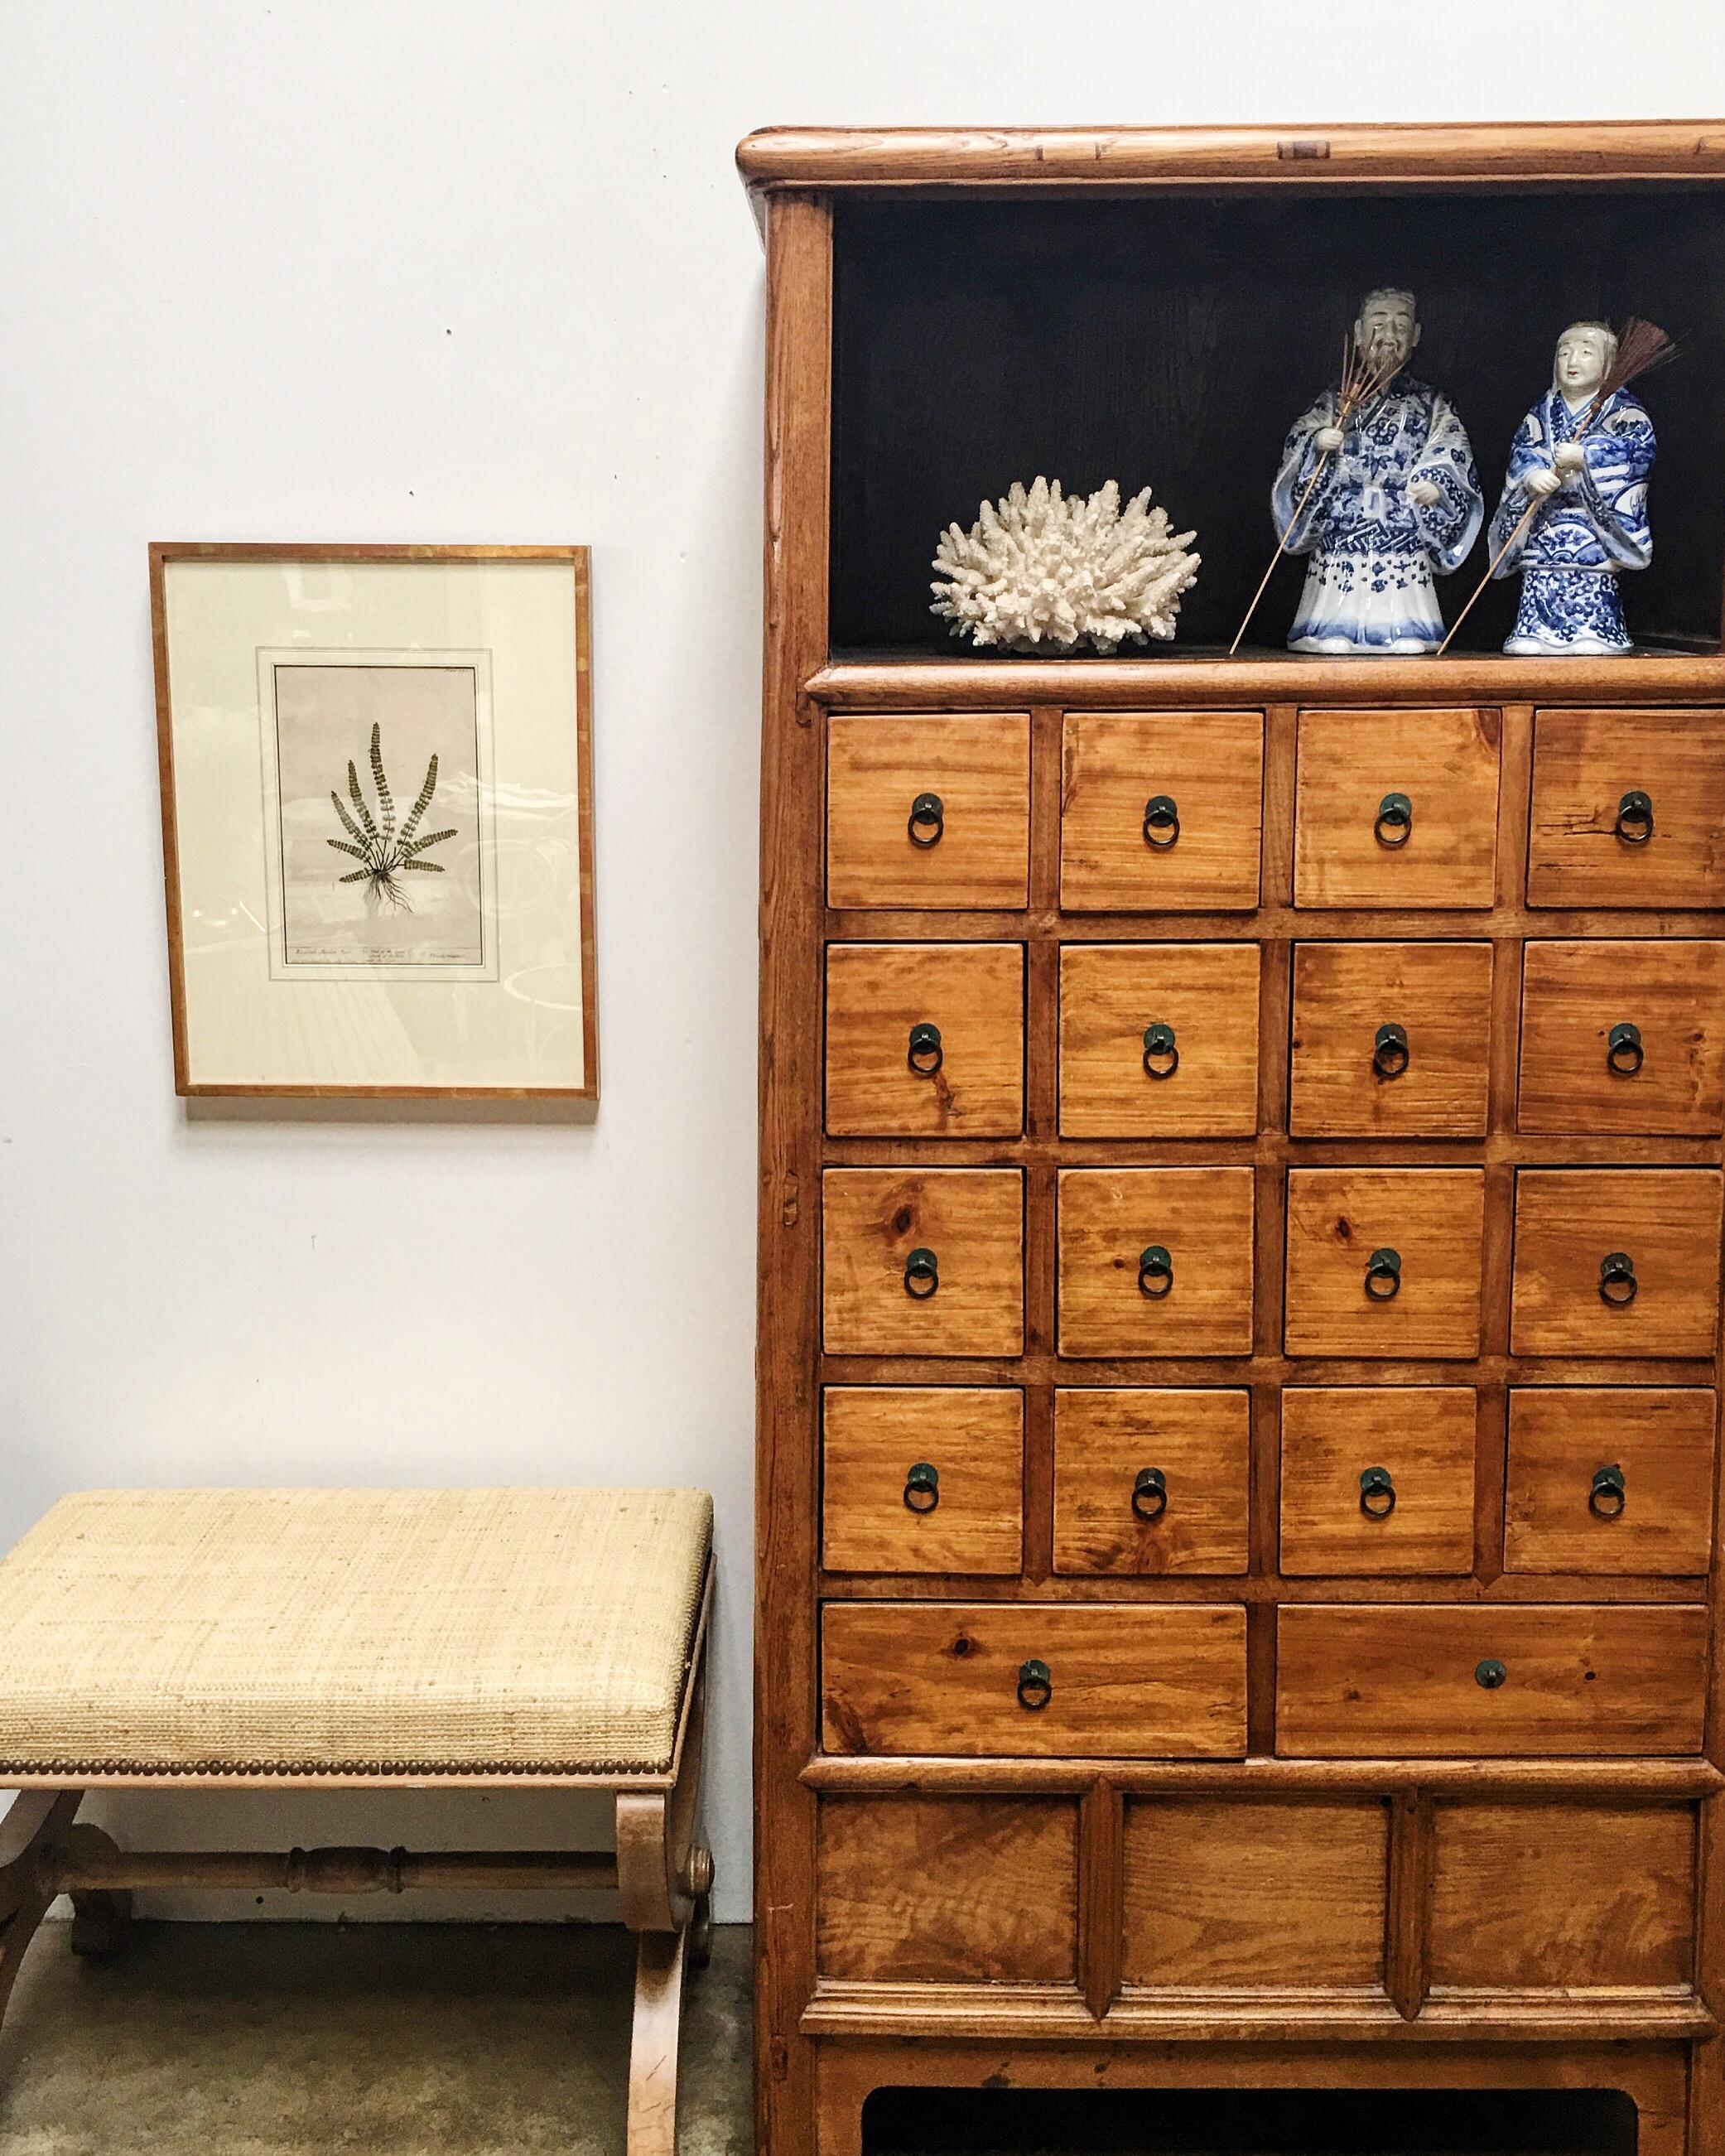 Impressive Chinese tapered apothecary herbal cabinet constructed of elm and made with mortise and tenon joinery. Featuring 18 drawers, each having a ring pull mounted on an antique Chinese coin ring. The top has an open storage shelf and the bottom